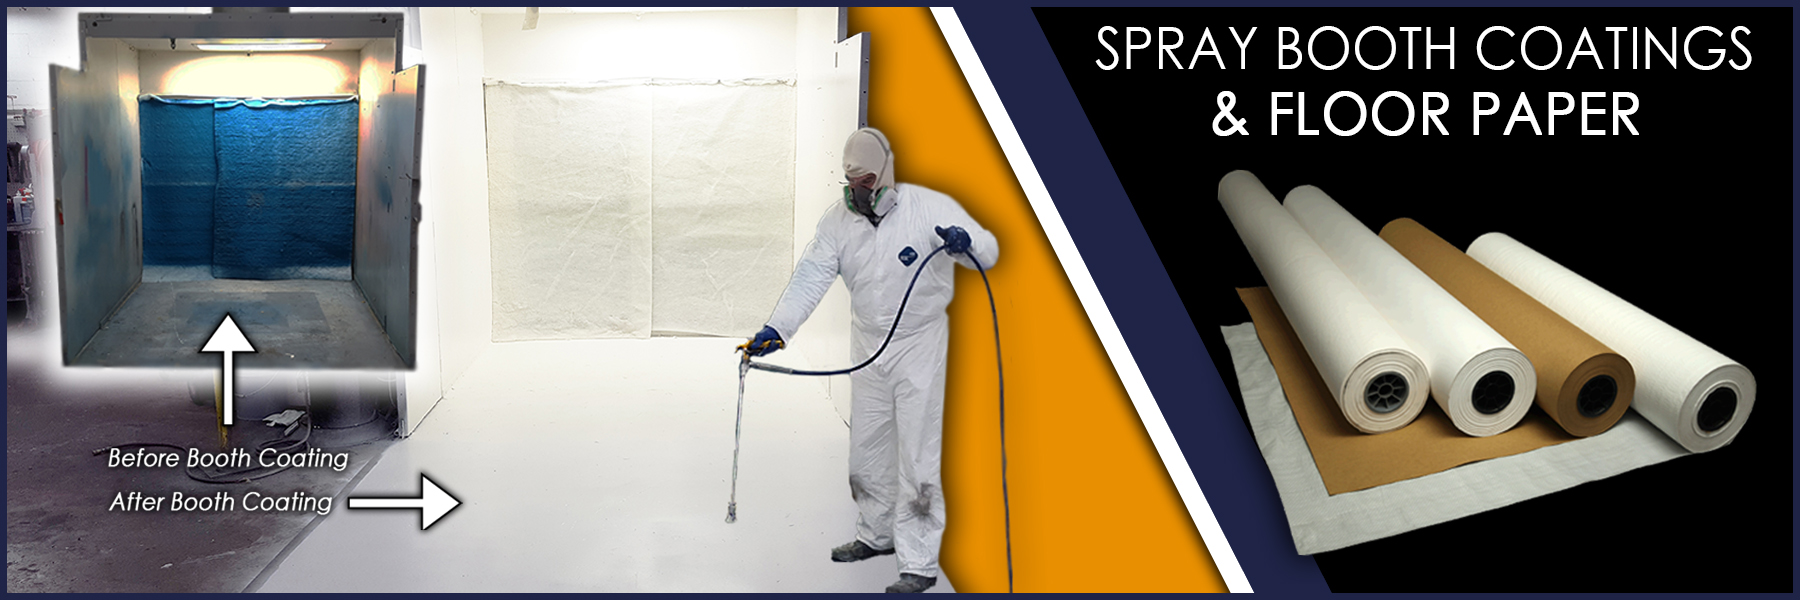 How to dispose of paint booth filters to protect environment?